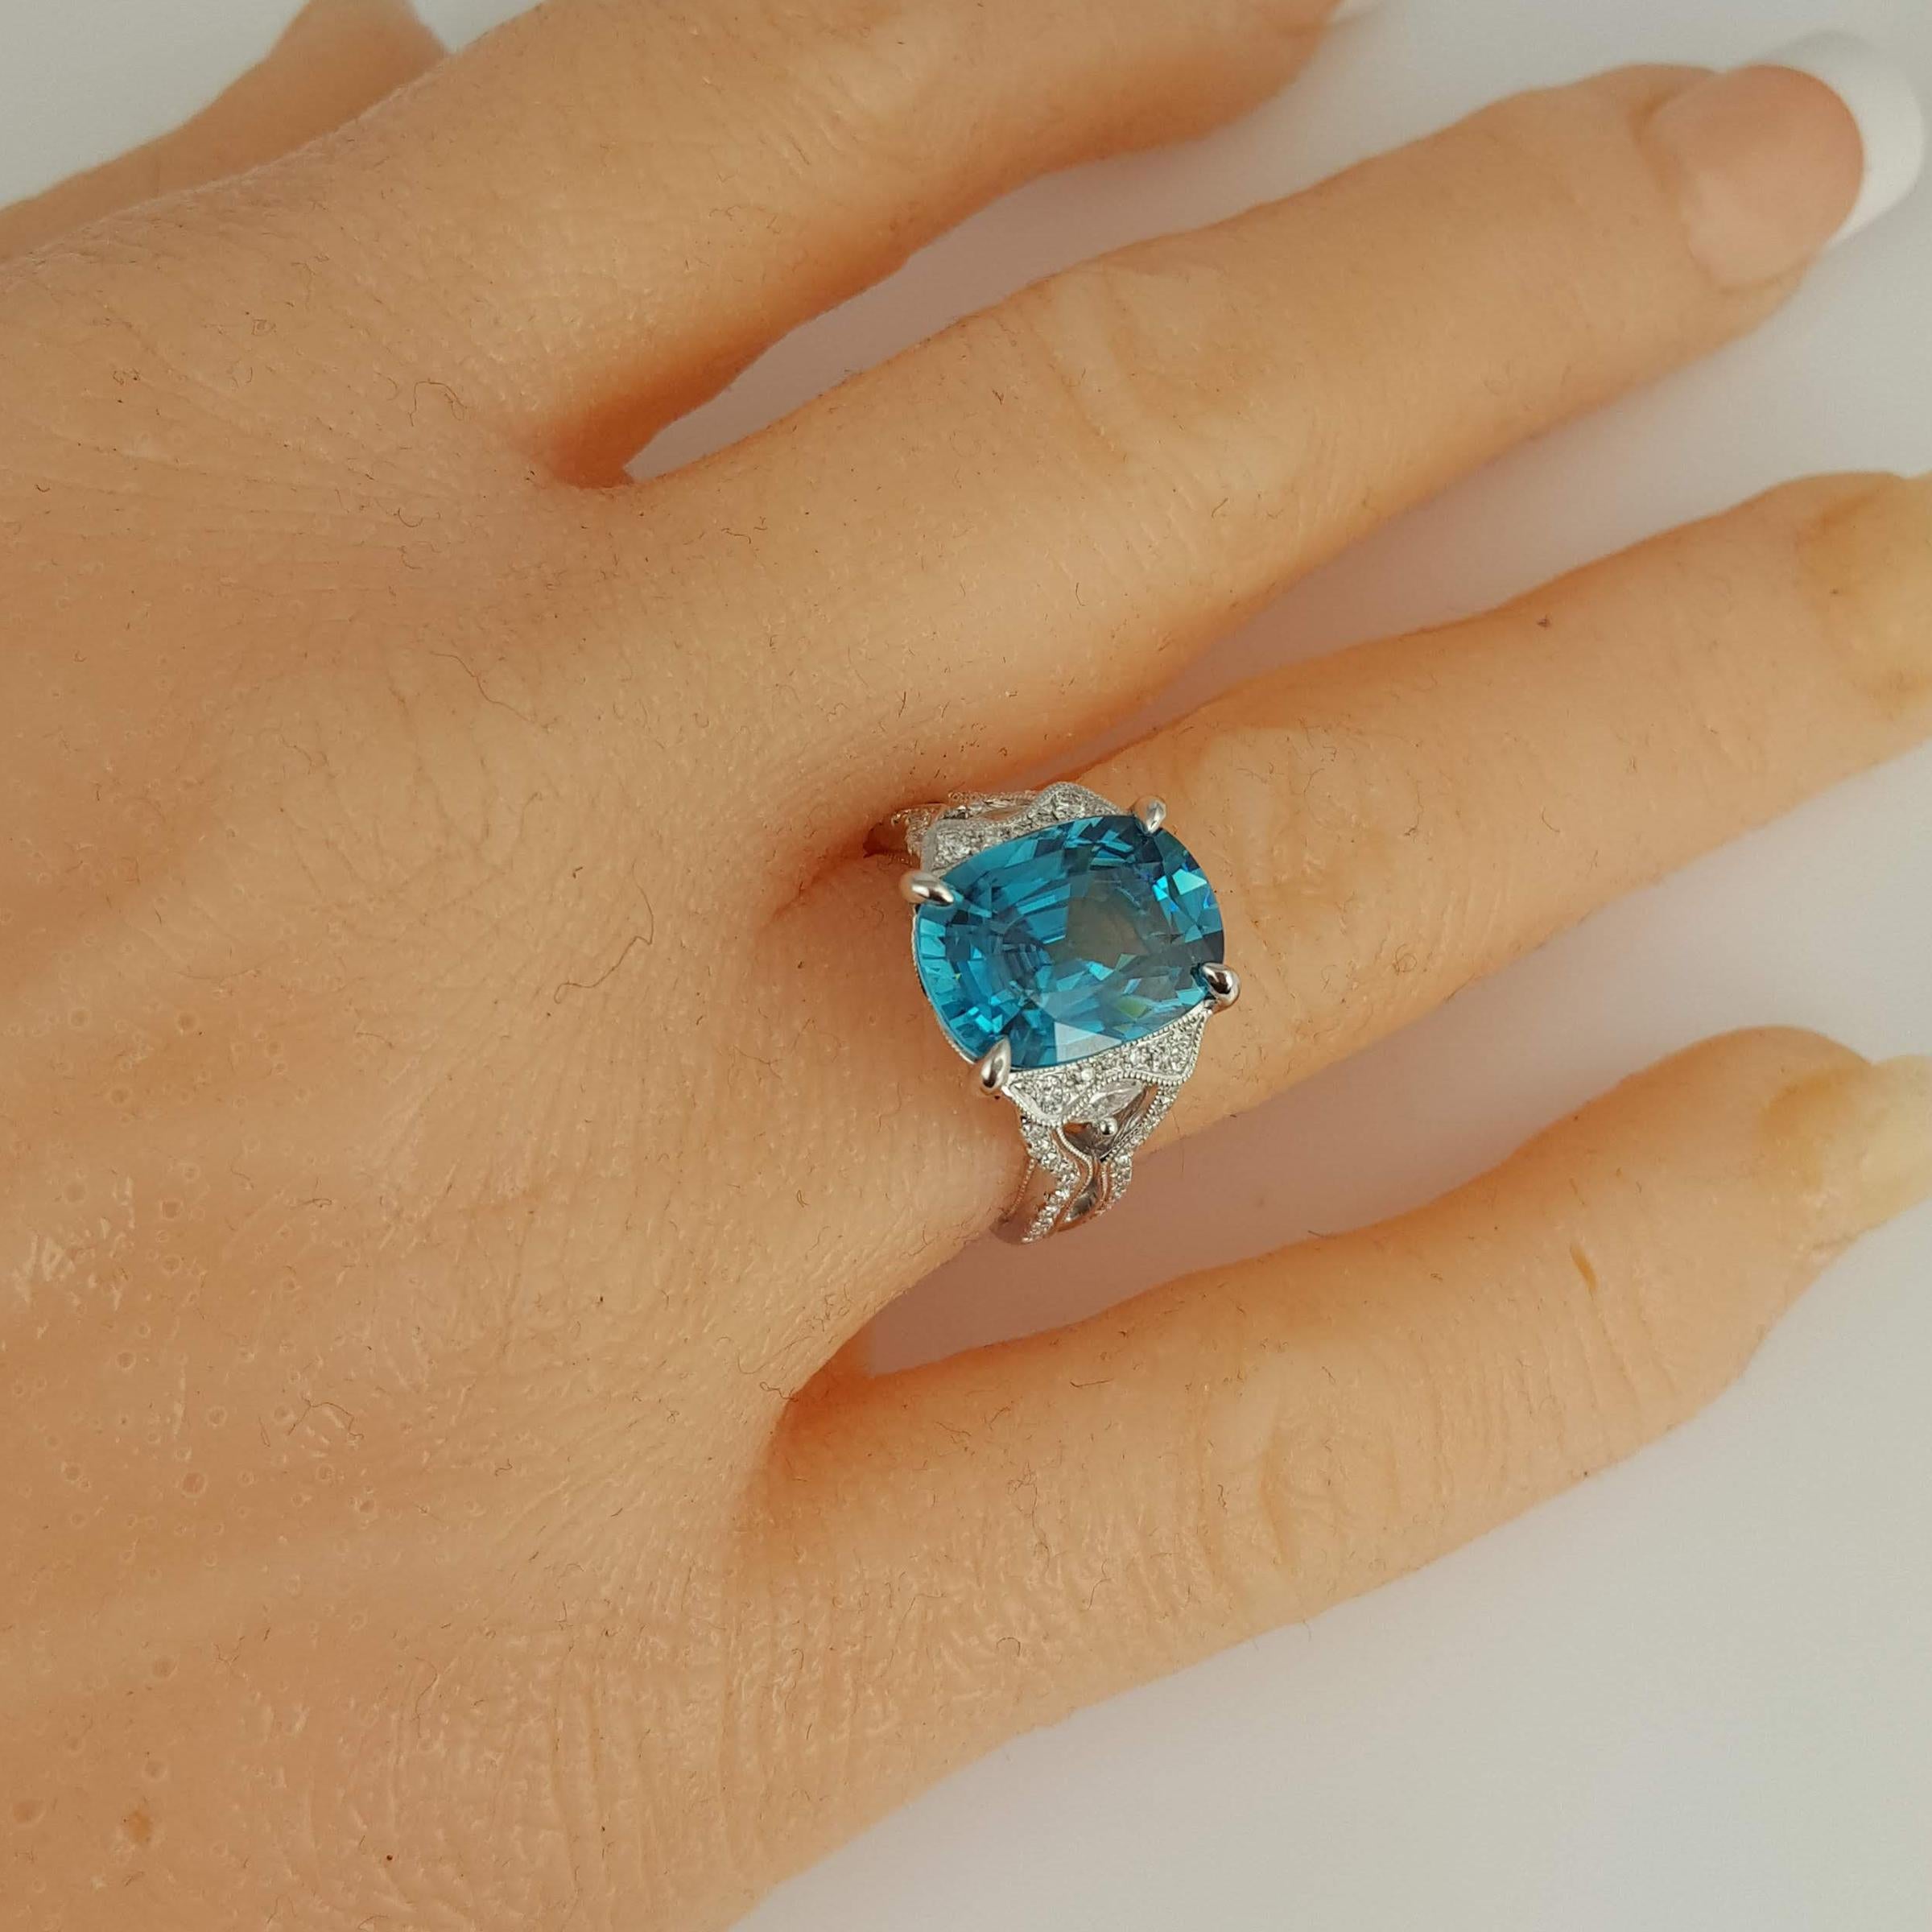 9.98 Ct Oval Cut Blue Zircon and 0.54 Carat Natural Diamond Ring in 18W ref1361 For Sale 3